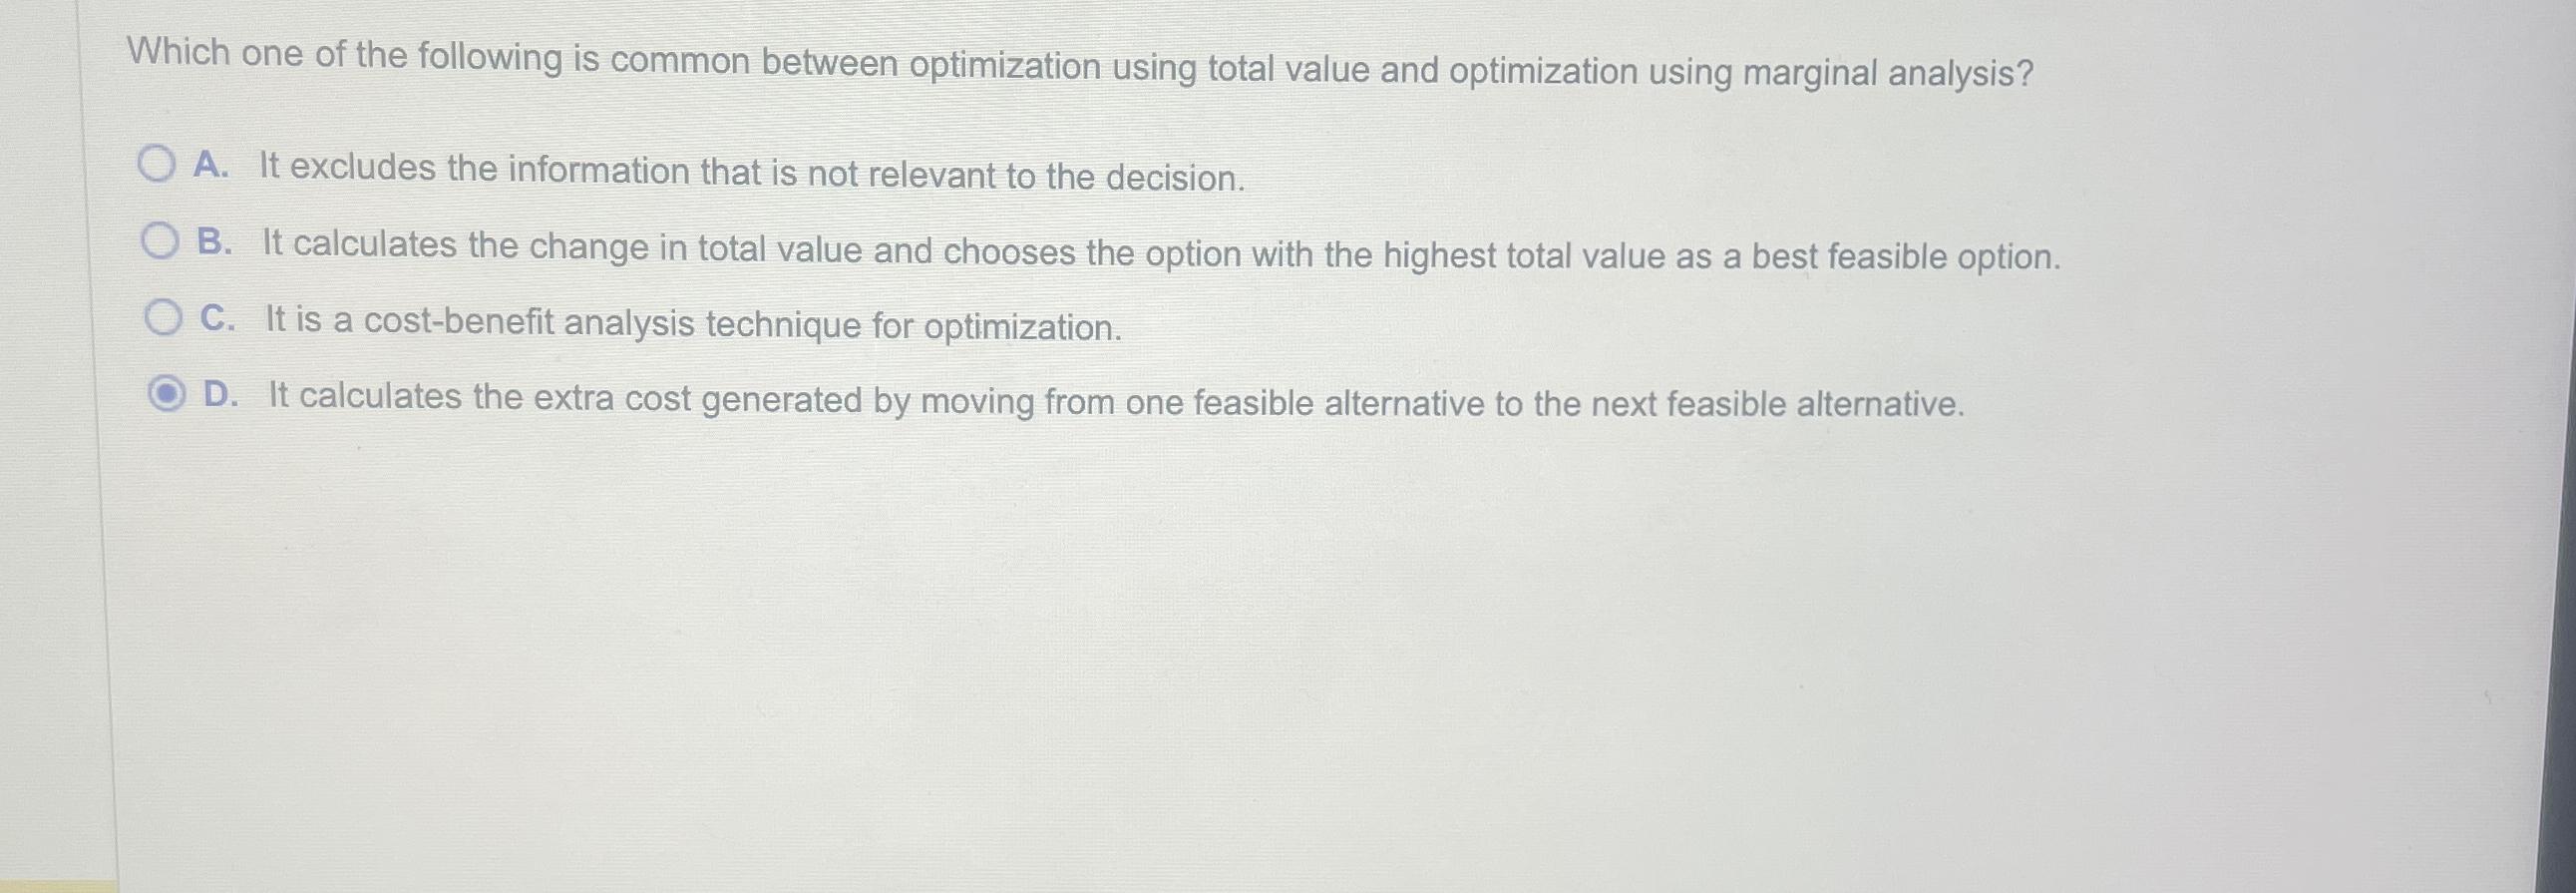 Which one of the following is common between optimization using total value and optimization using marginal